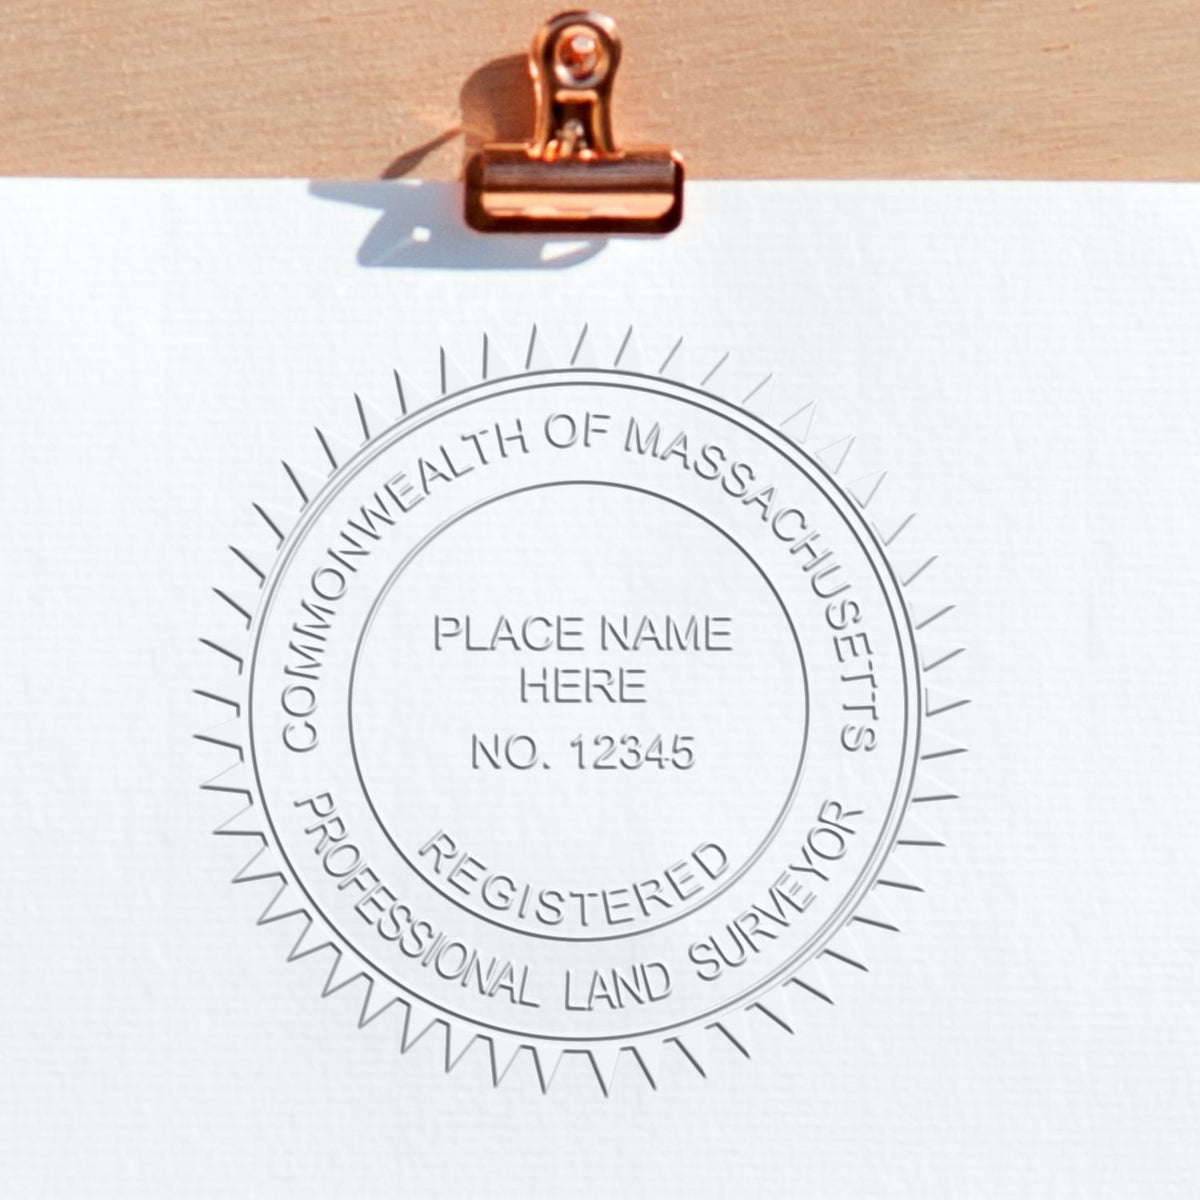 A stamped impression of the Massachusetts Desk Surveyor Seal Embosser in this stylish lifestyle photo, setting the tone for a unique and personalized product.